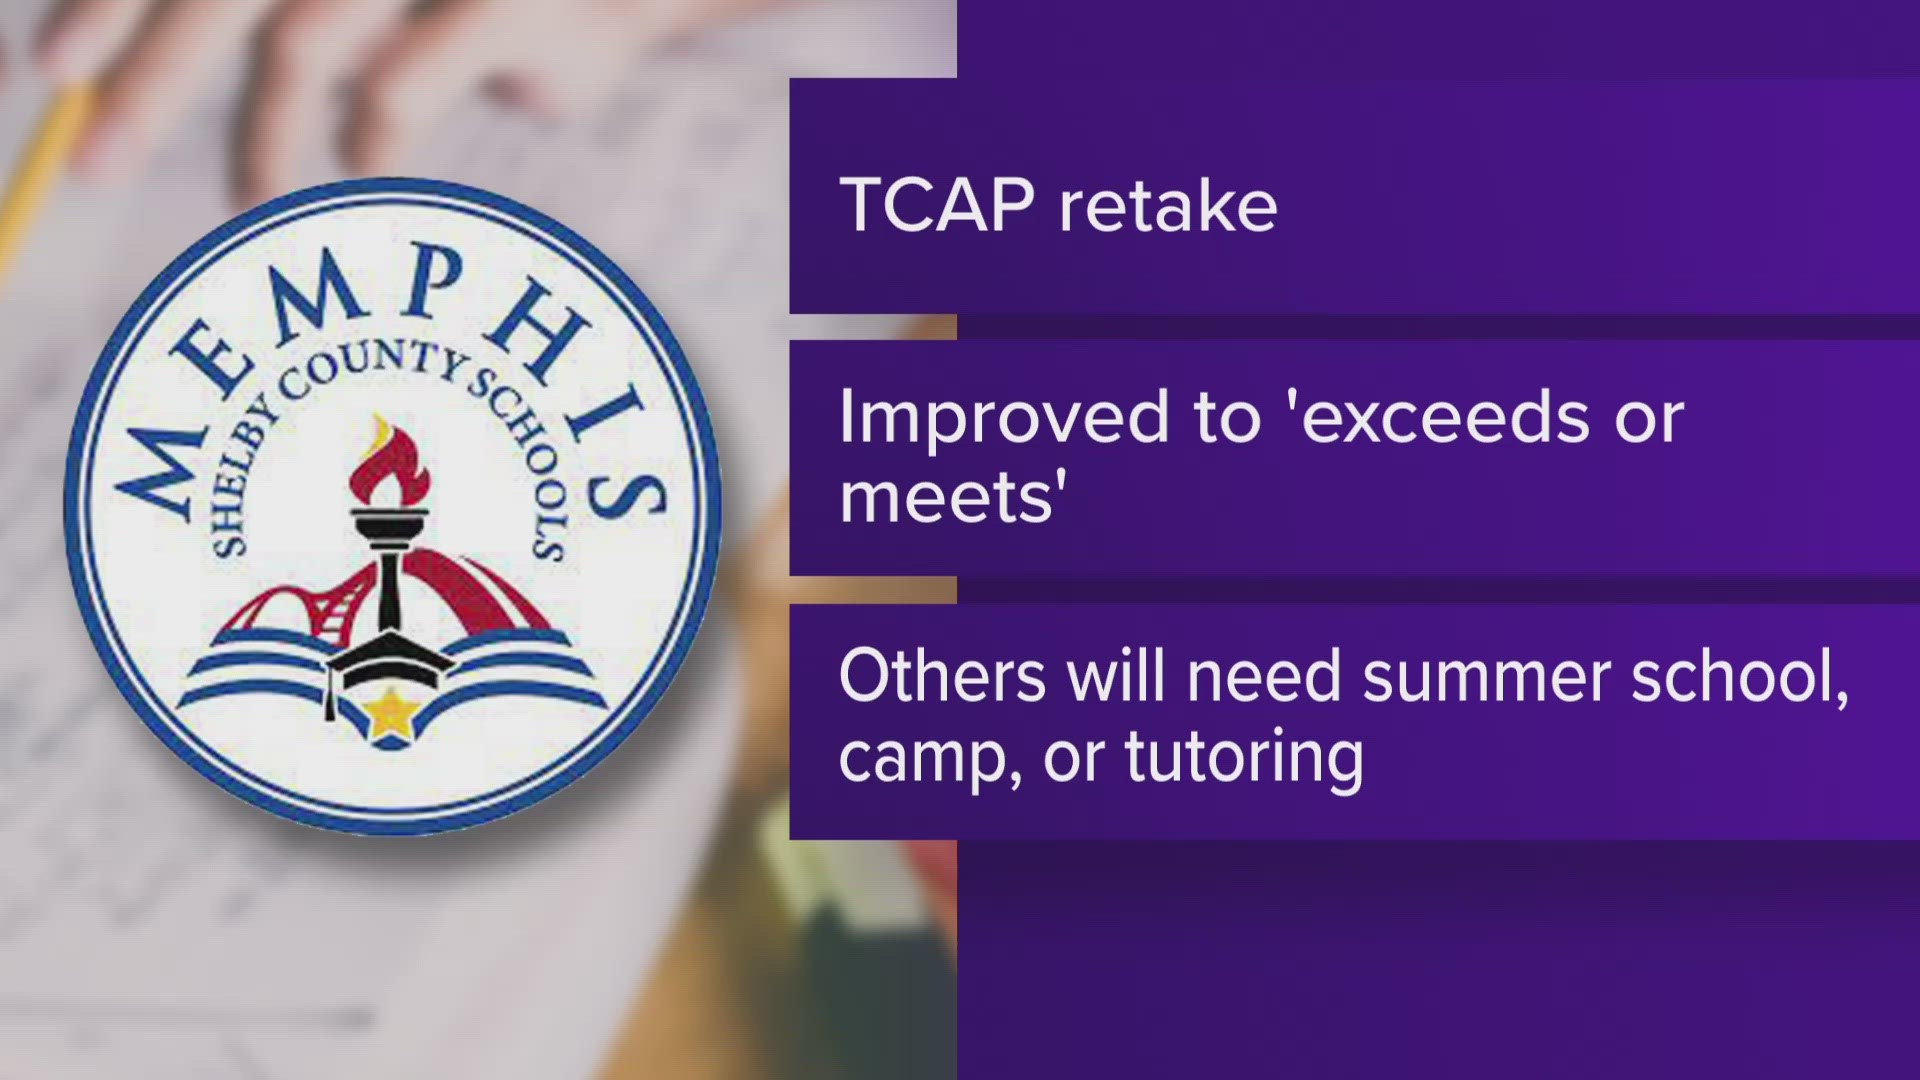 The Tennessee Department of Education said 8.1% of Memphis-Shelby County Schools third-grade students improved their scores to proficient on the TCAP retake.